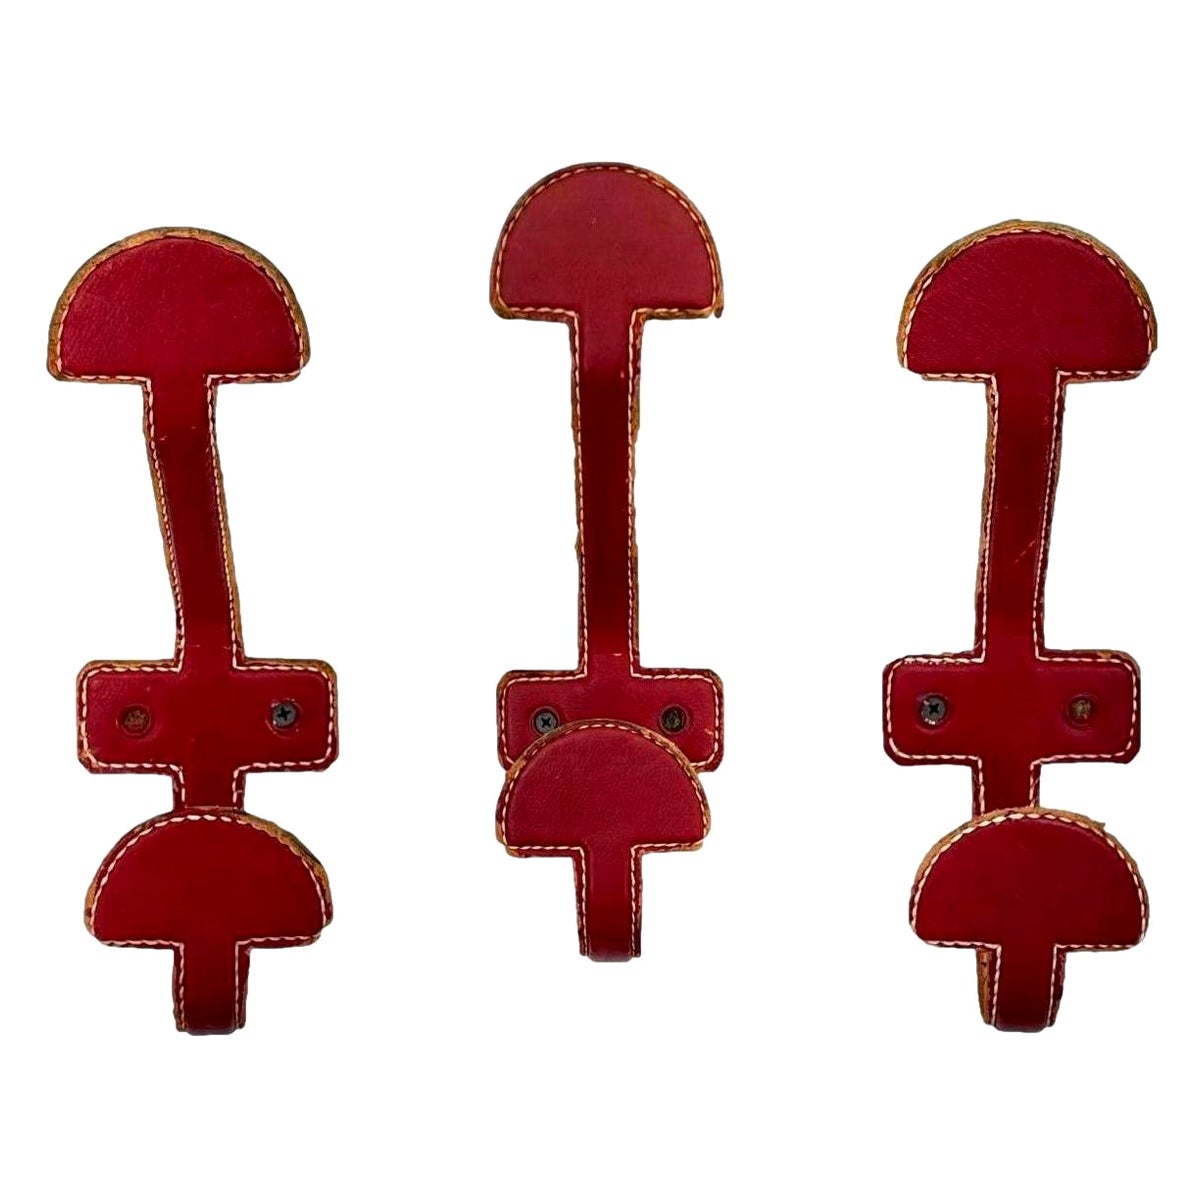 Set of 3 Jacques Adnet Red Leather Coat Hooks, 1950s, France